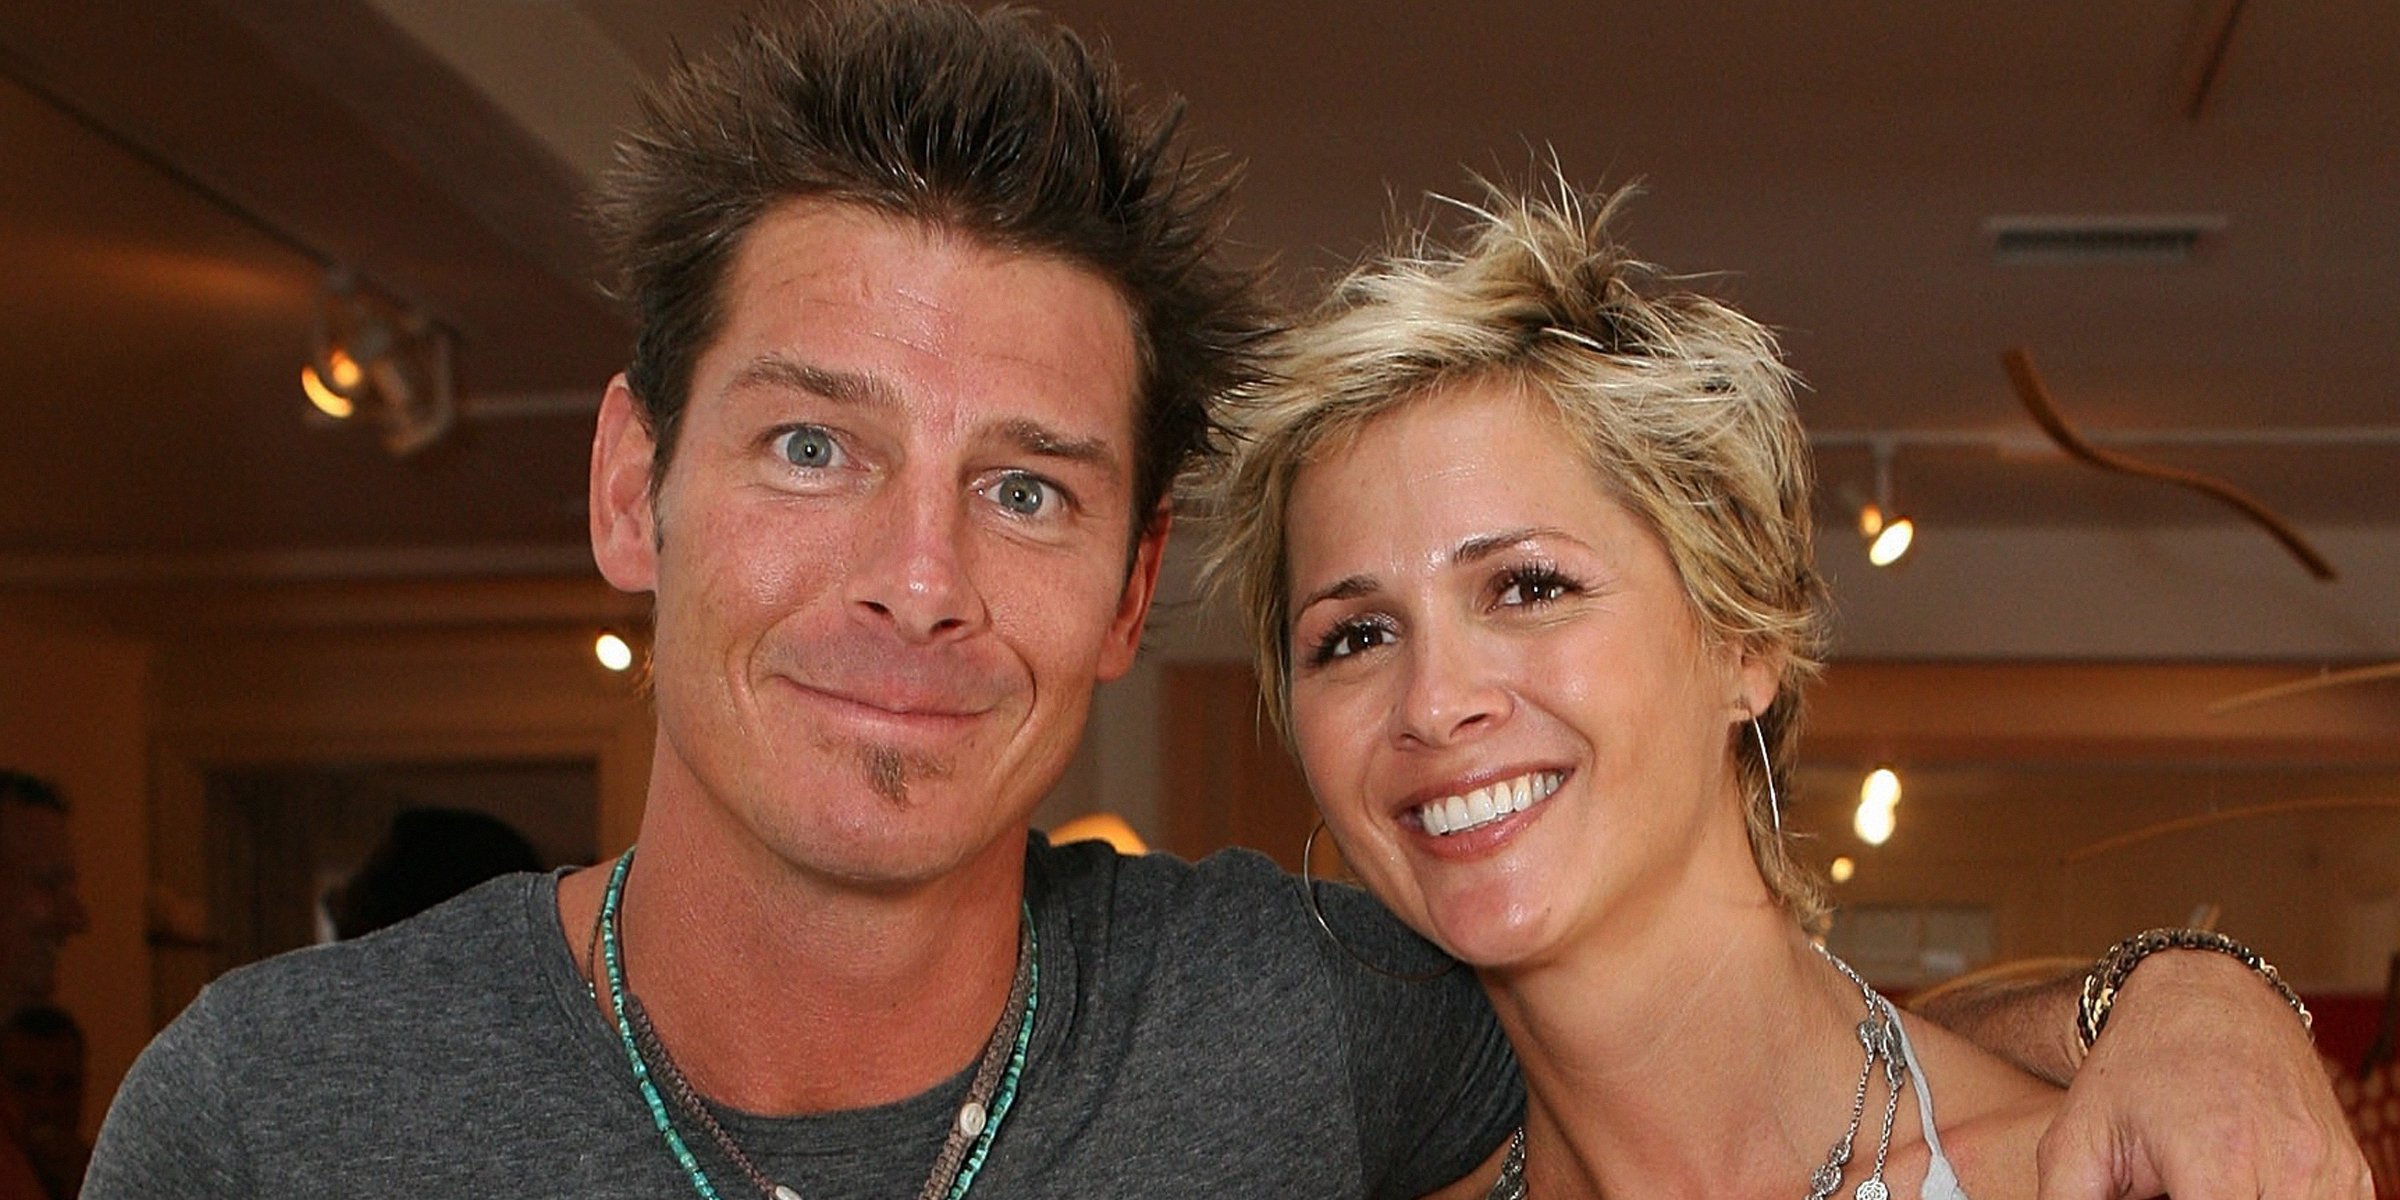 Andrea Bock and Ty Pennington | Source: Getty Images